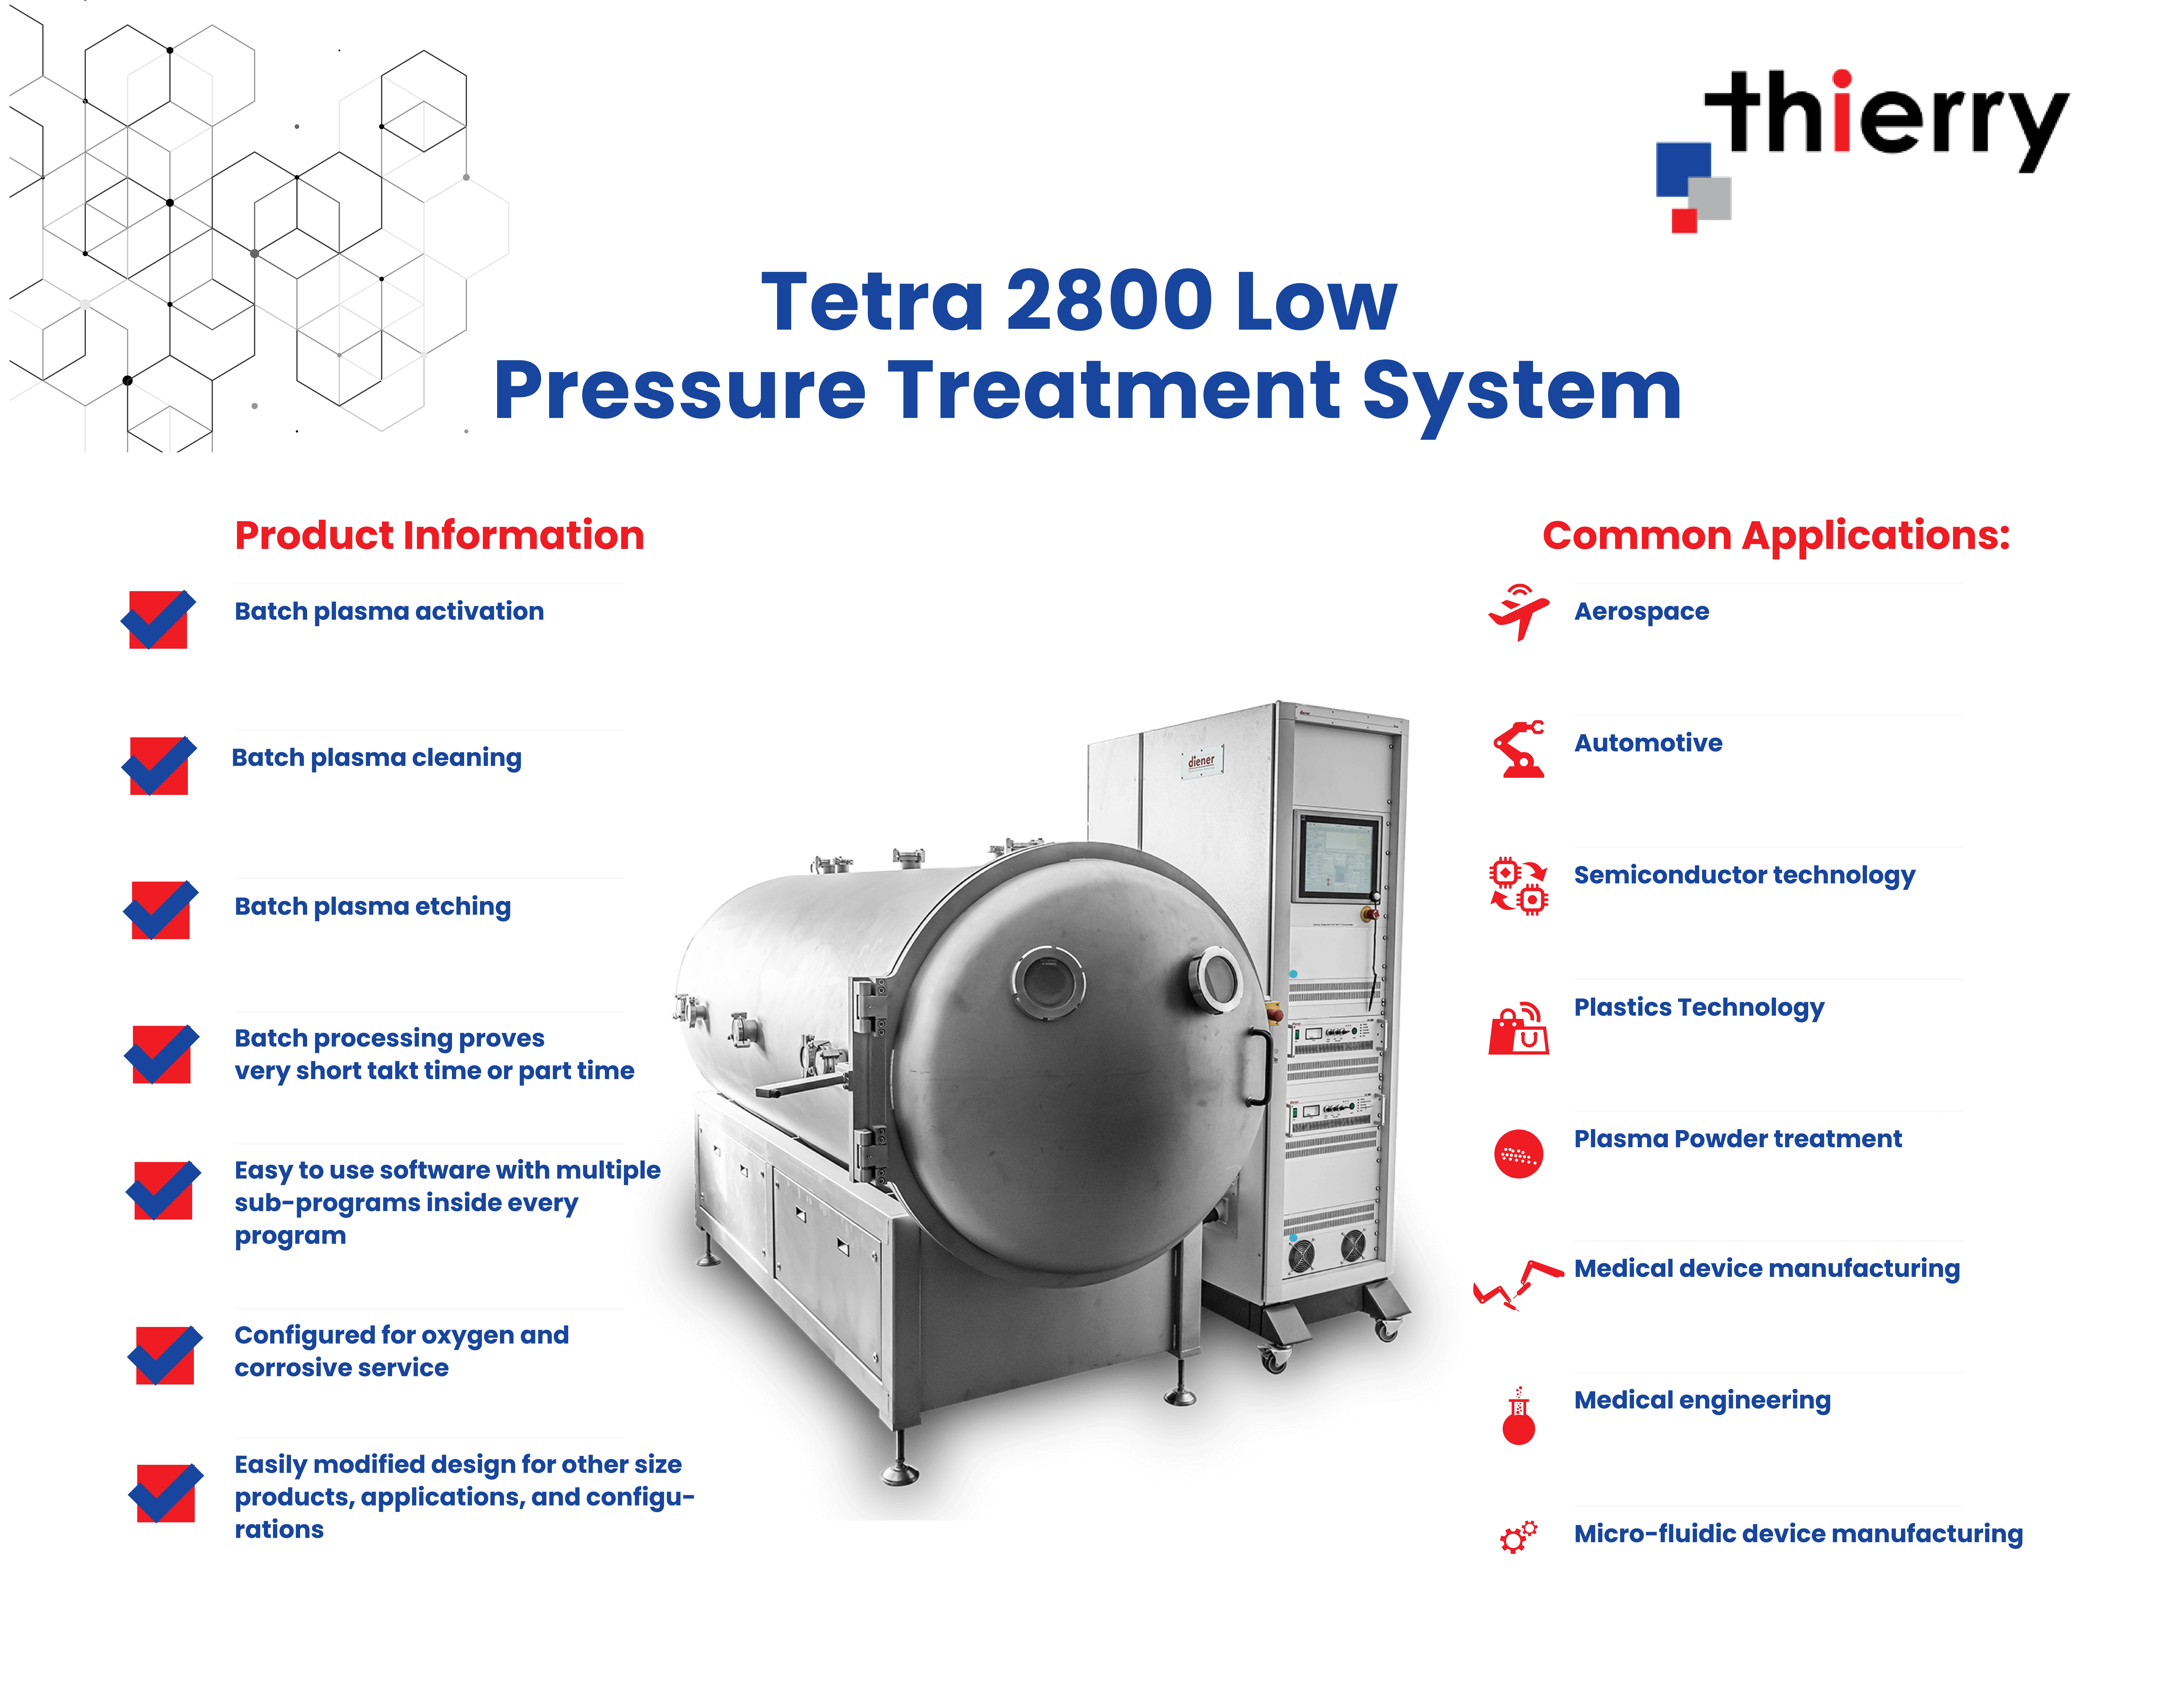 Thierry_Corp_Tetra_2800_Low_Pressure_Treatment_System-01